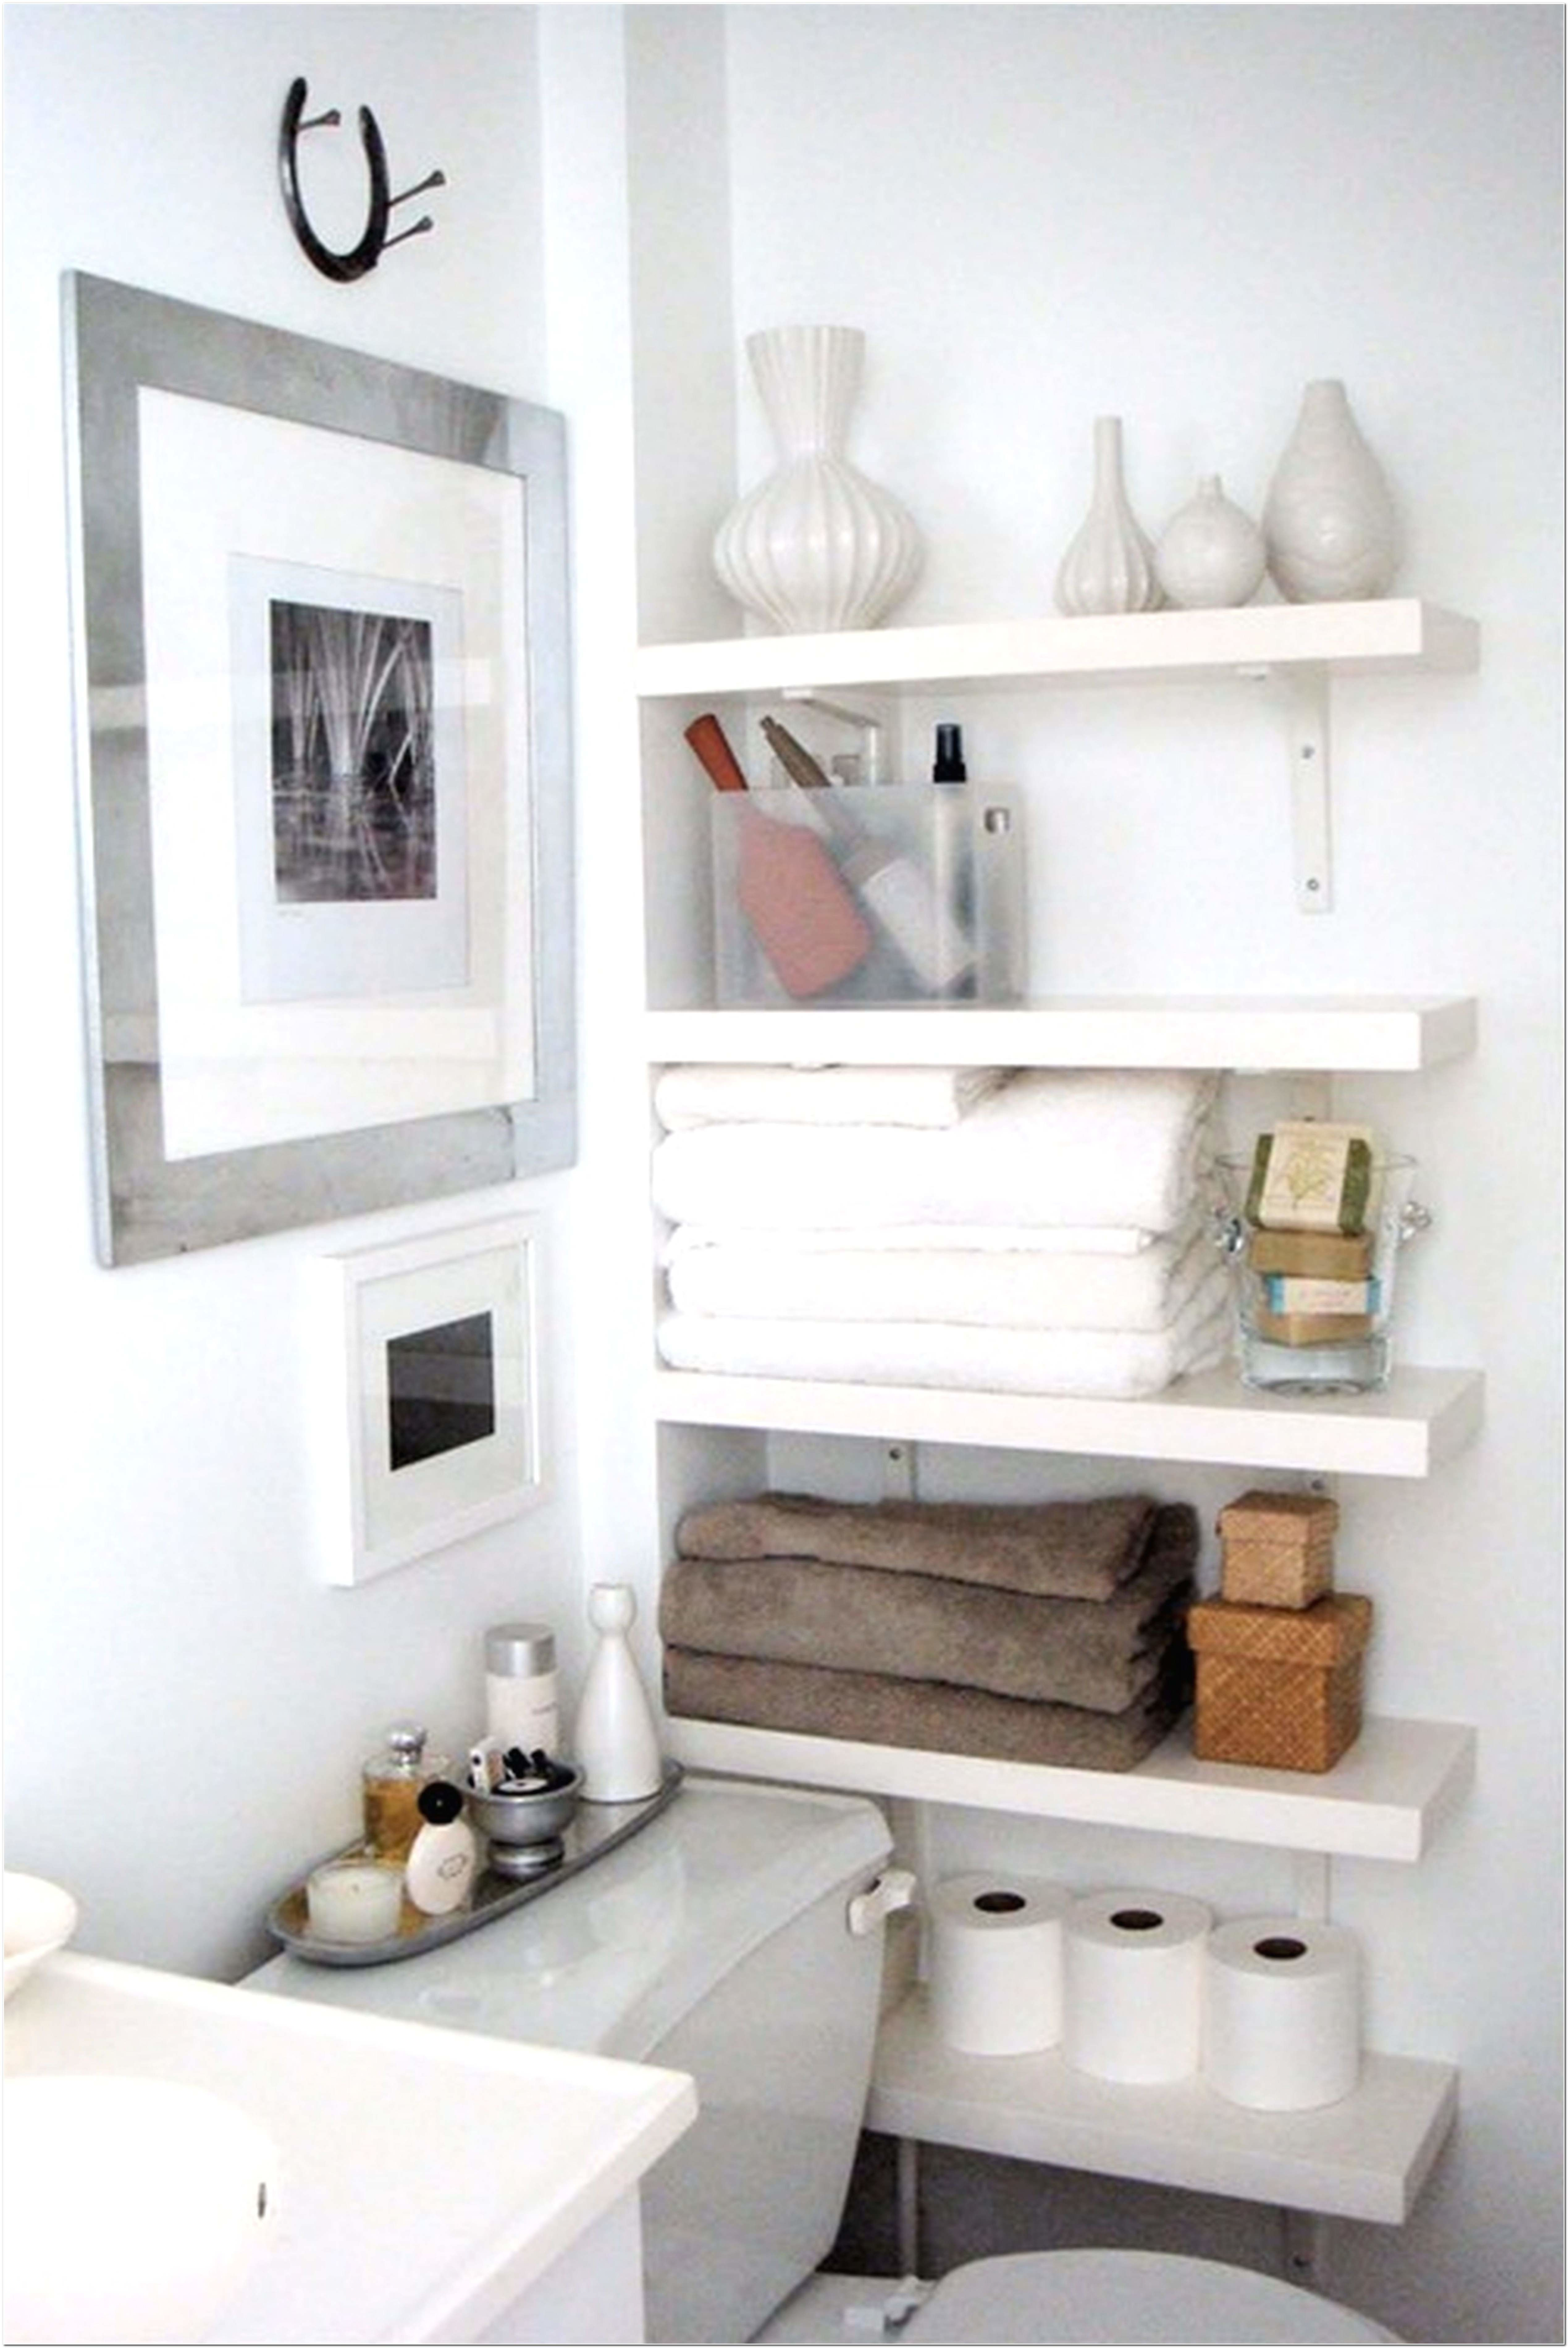 32 Incredible Bathroom Storage Ideas That You Should See regarding size 5077 X 7602